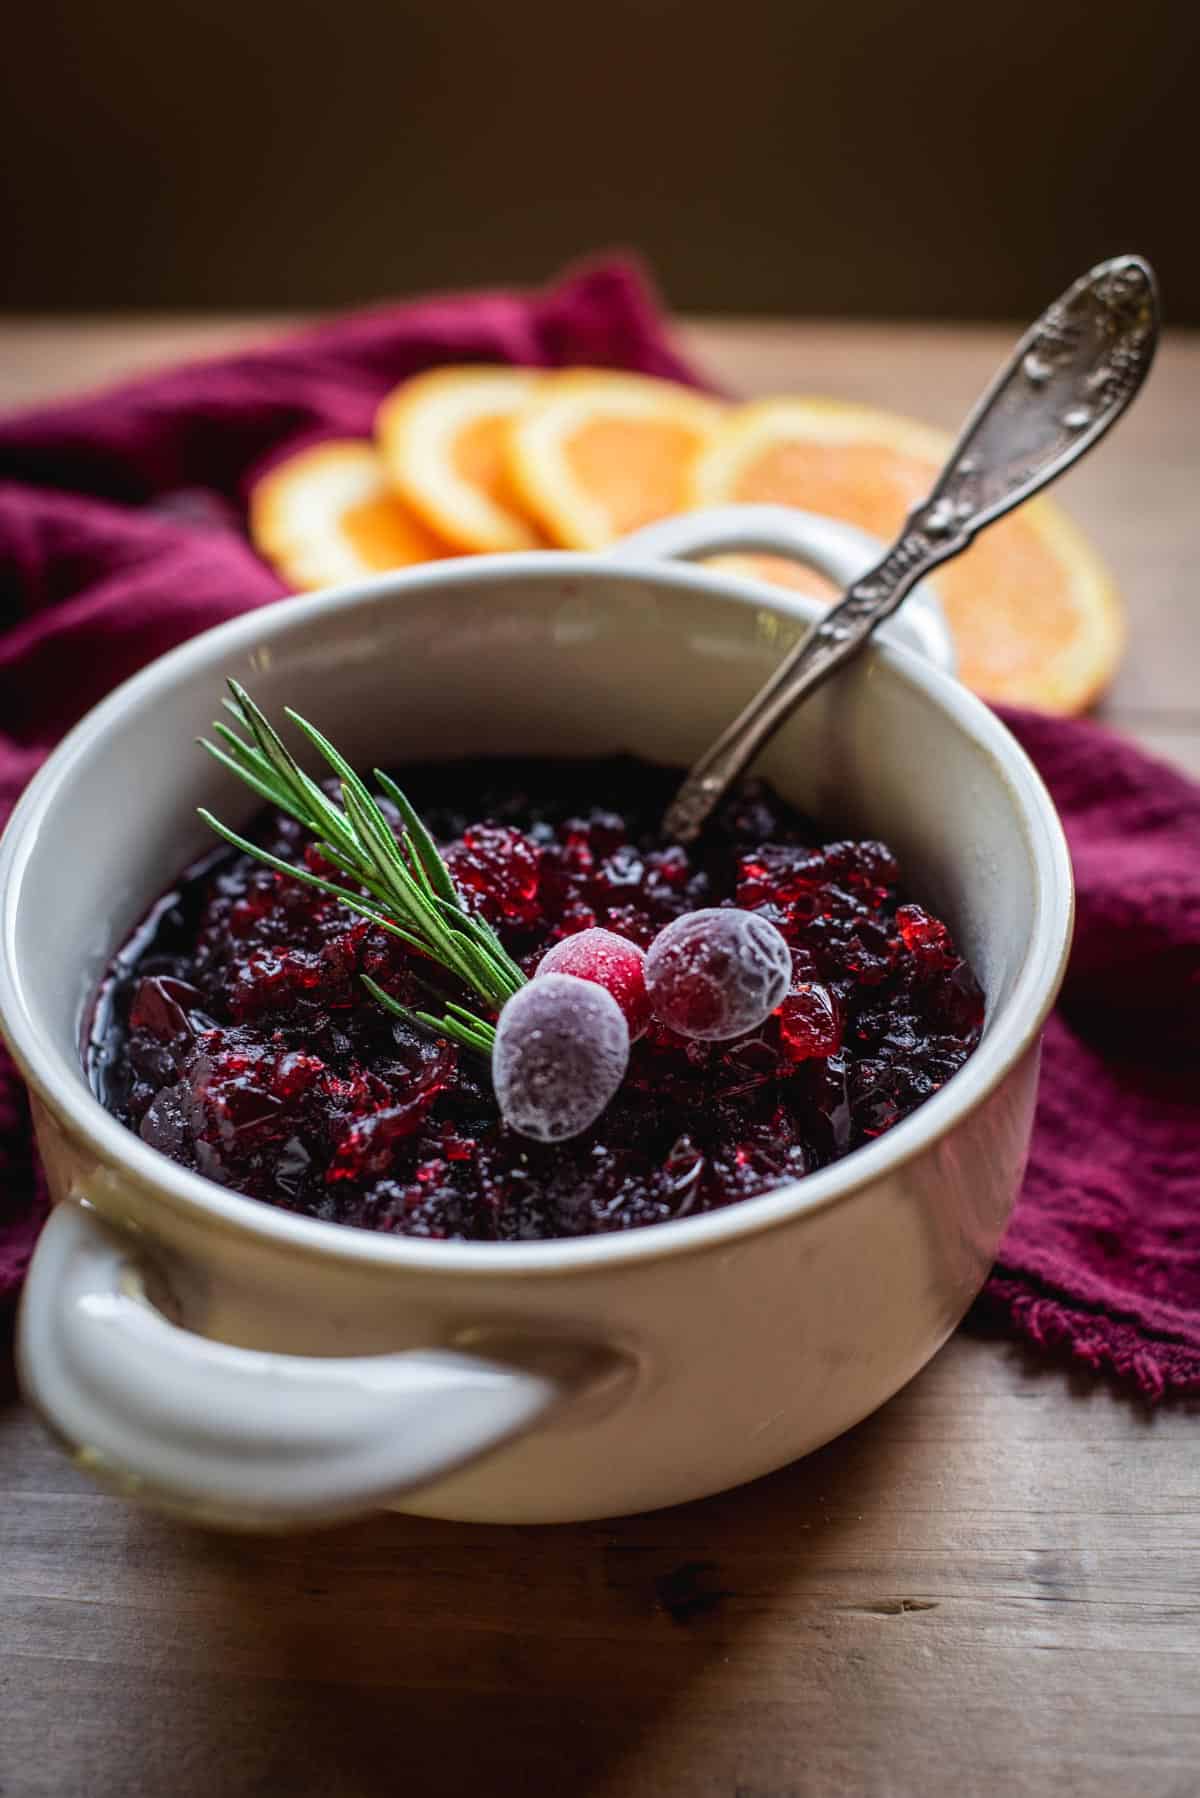 Cranberry Sauce in a white bowl with handles. It is sitting on a wooden table draped in red fabric.  The sauce is topped with frosted cranberries and herbs. There is orange segments lying on the red fabric on the table.